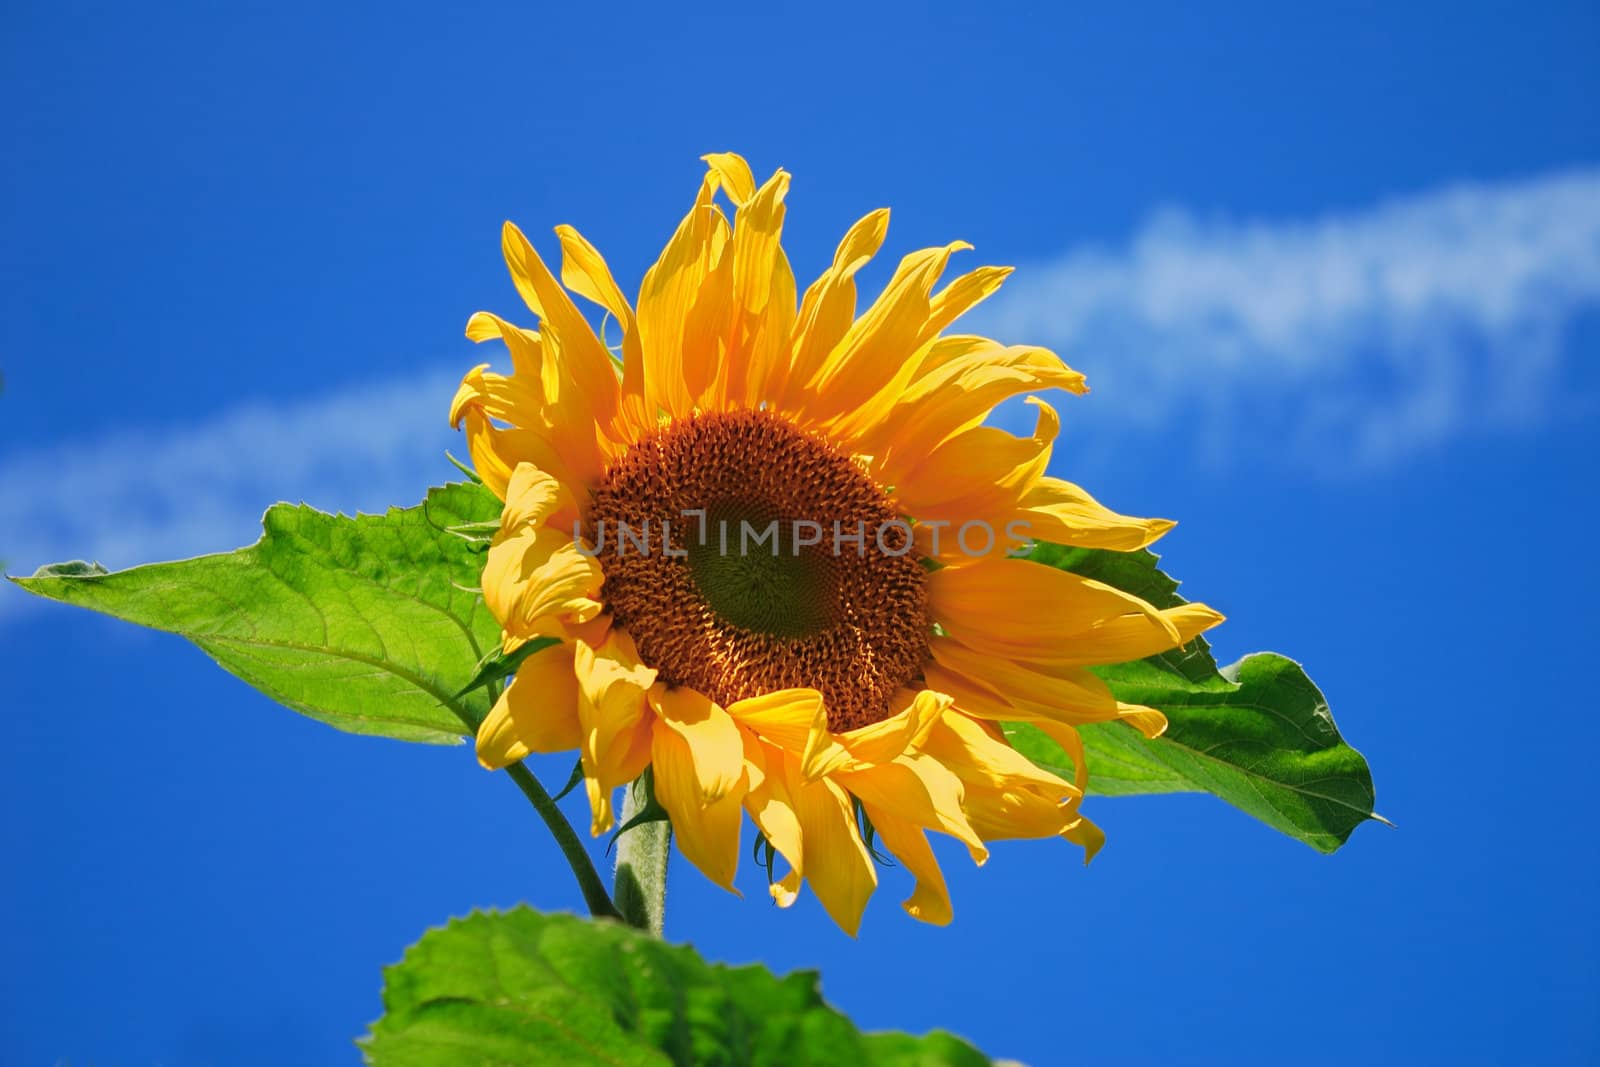 Blossoming sunflower on a background of the blue sky